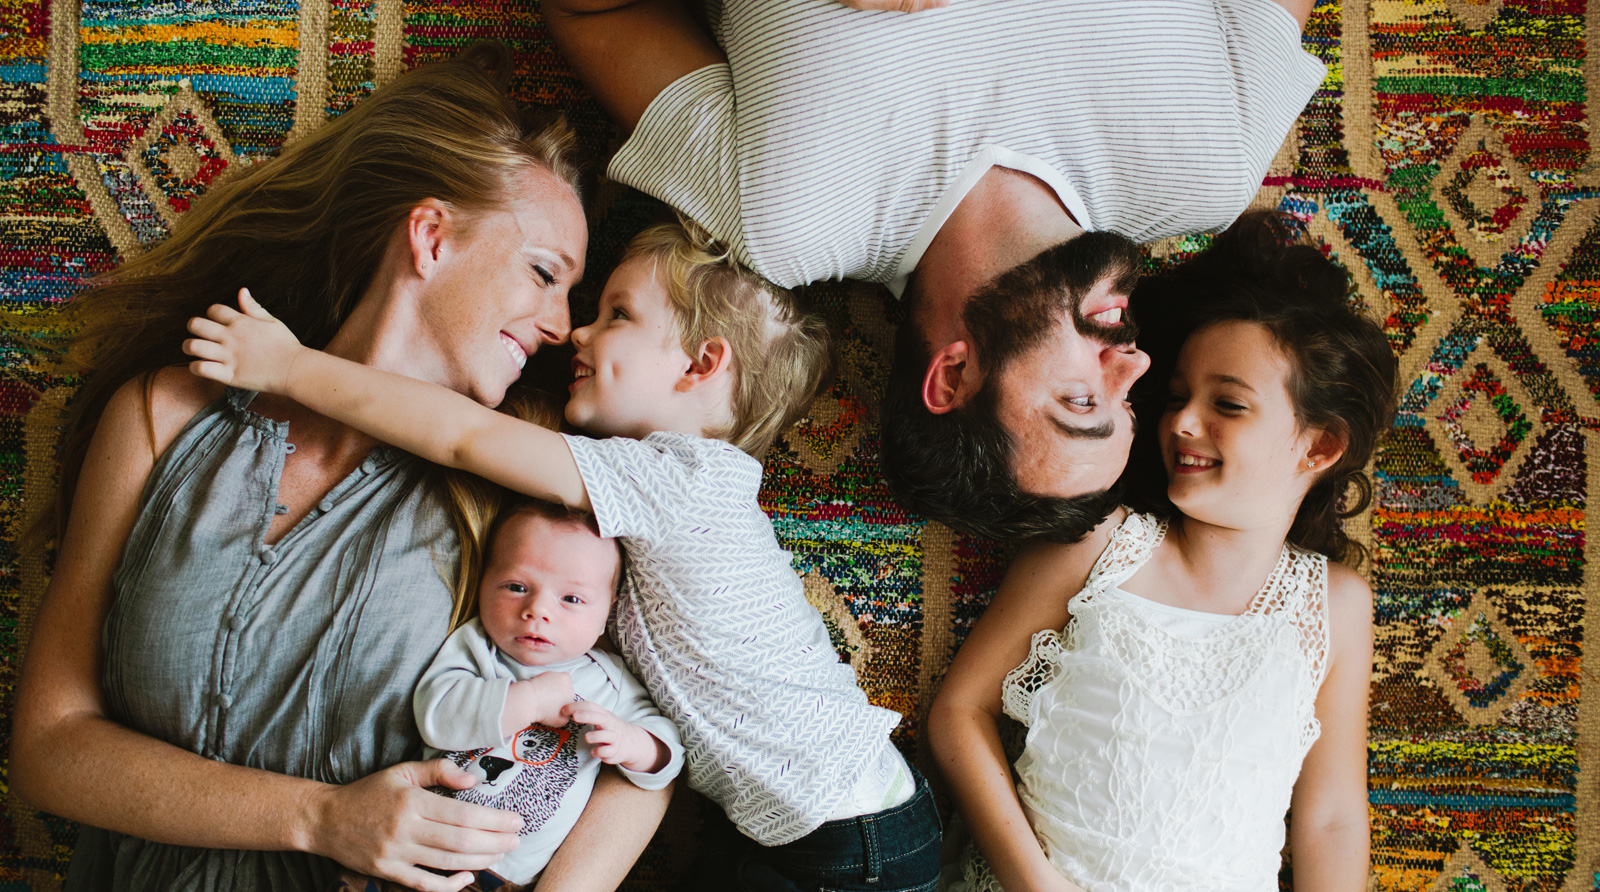 Family laying together as part of the MyPoint Campaign